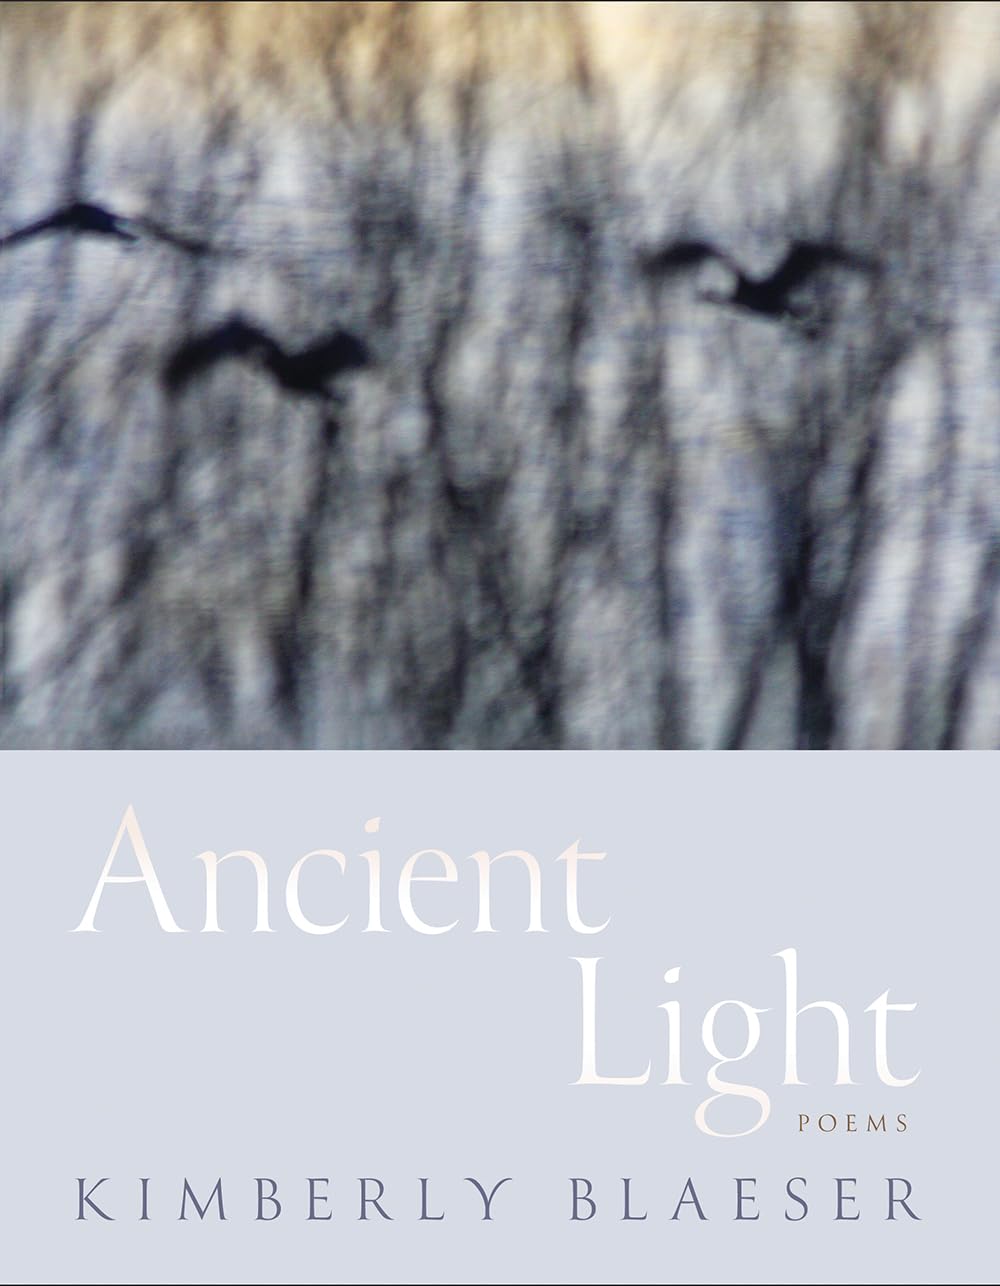 Ancient Light by Kimberly Blaeser